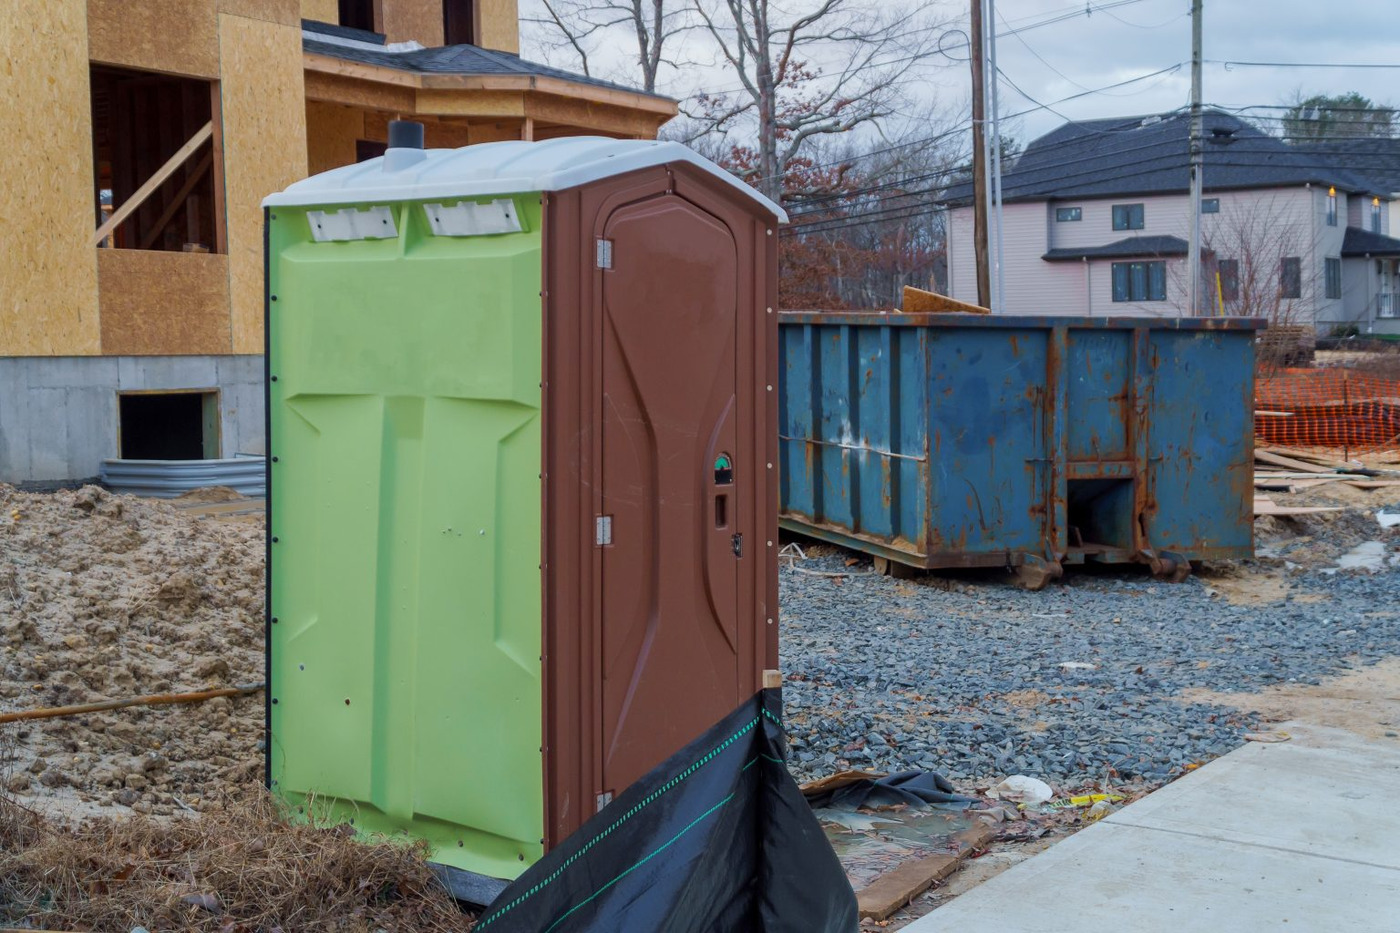 HQ Portables and Dumpsters, based in Milpitas, CA, specializes in providing top-quality portable toilet and dumpster rental services.